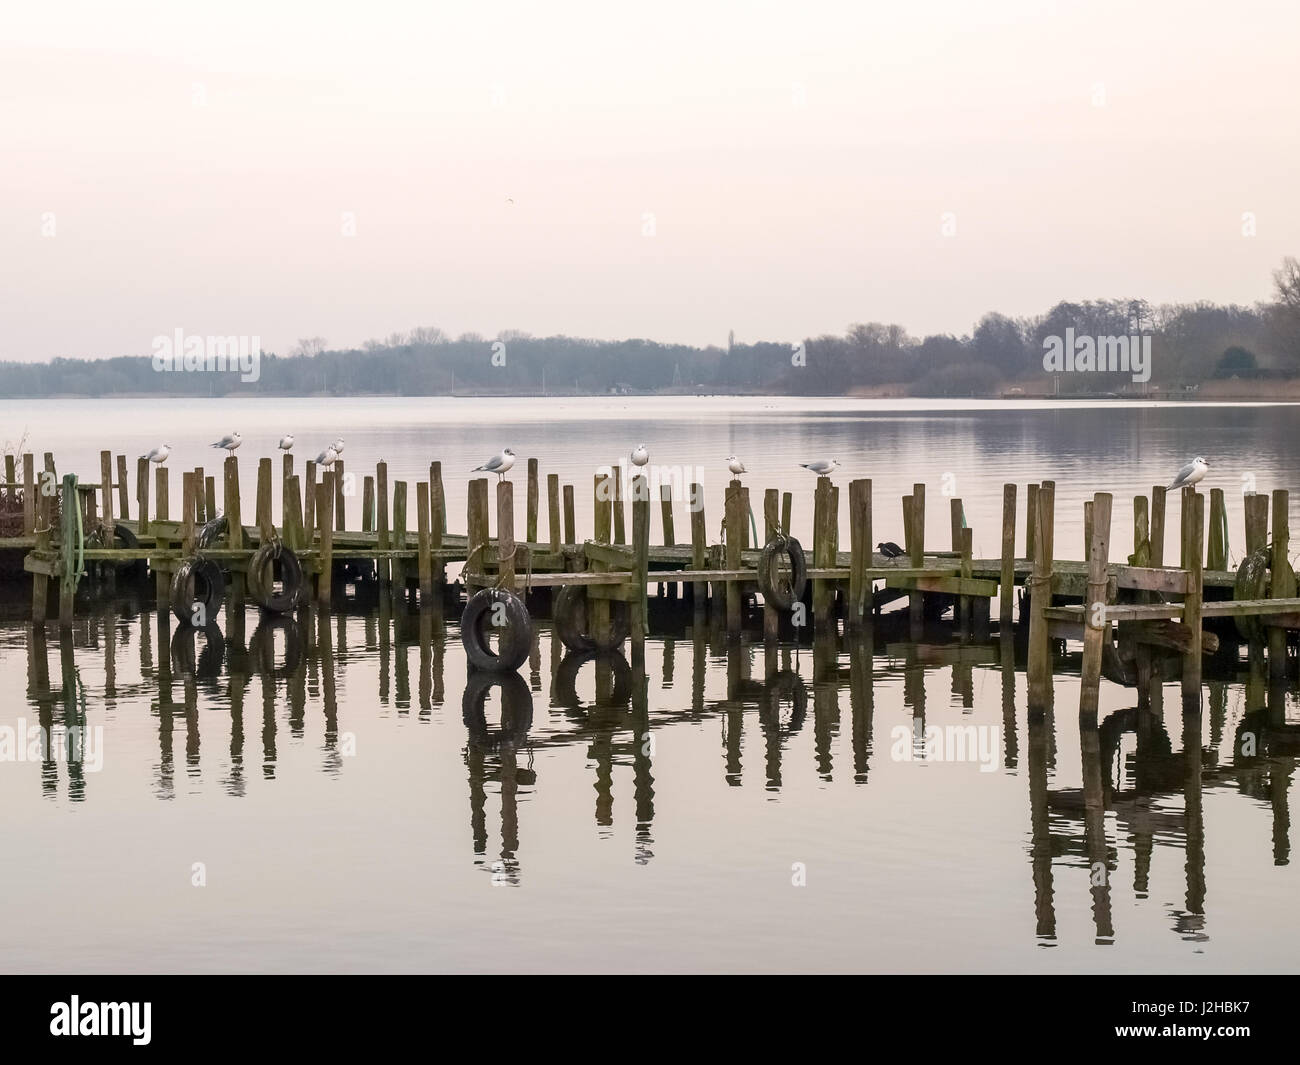 Bad Zwischenahn, Germany. Image of the evening in the winter from the lakefront with a slight haze in the distance. Stock Photo